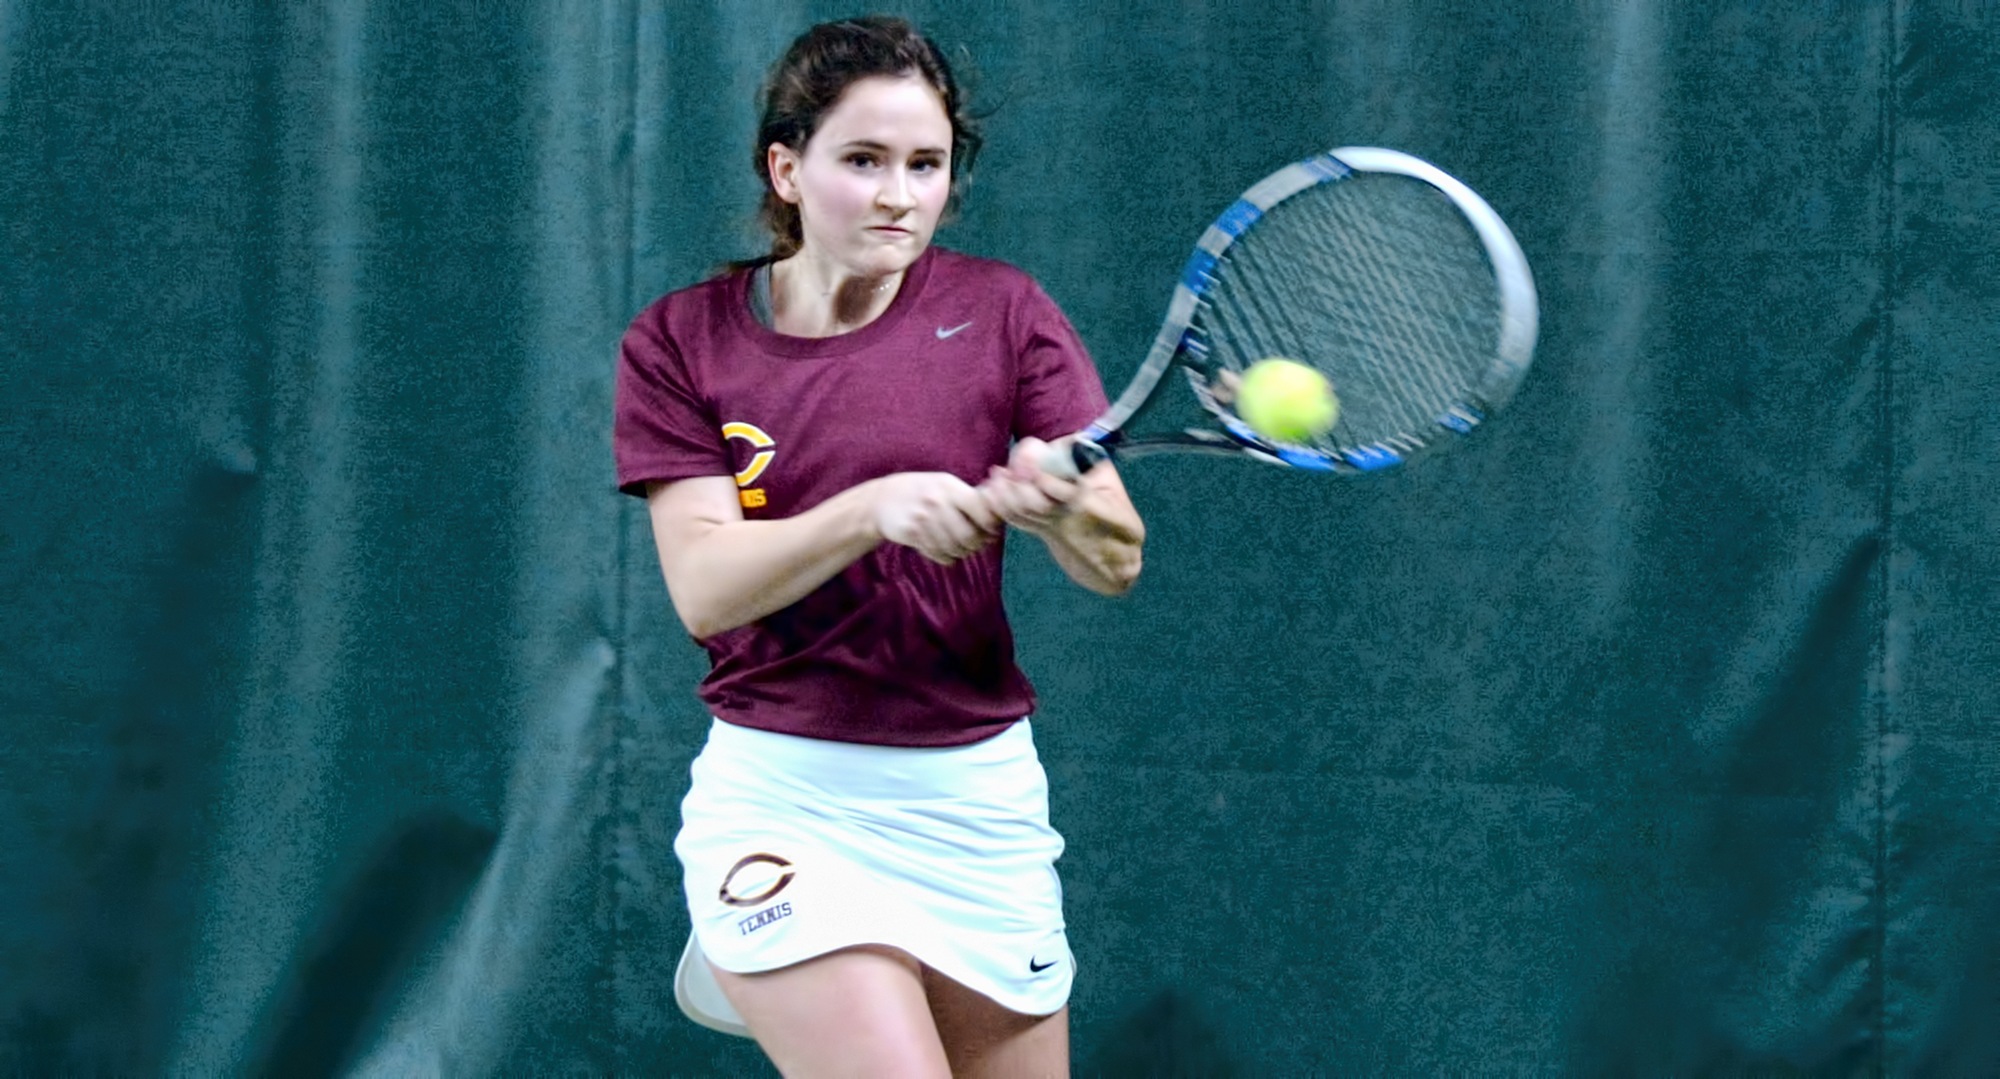 Freshman Ivy Mattson won games in both her sets against NCAA Division II opponent St. Cloud State.